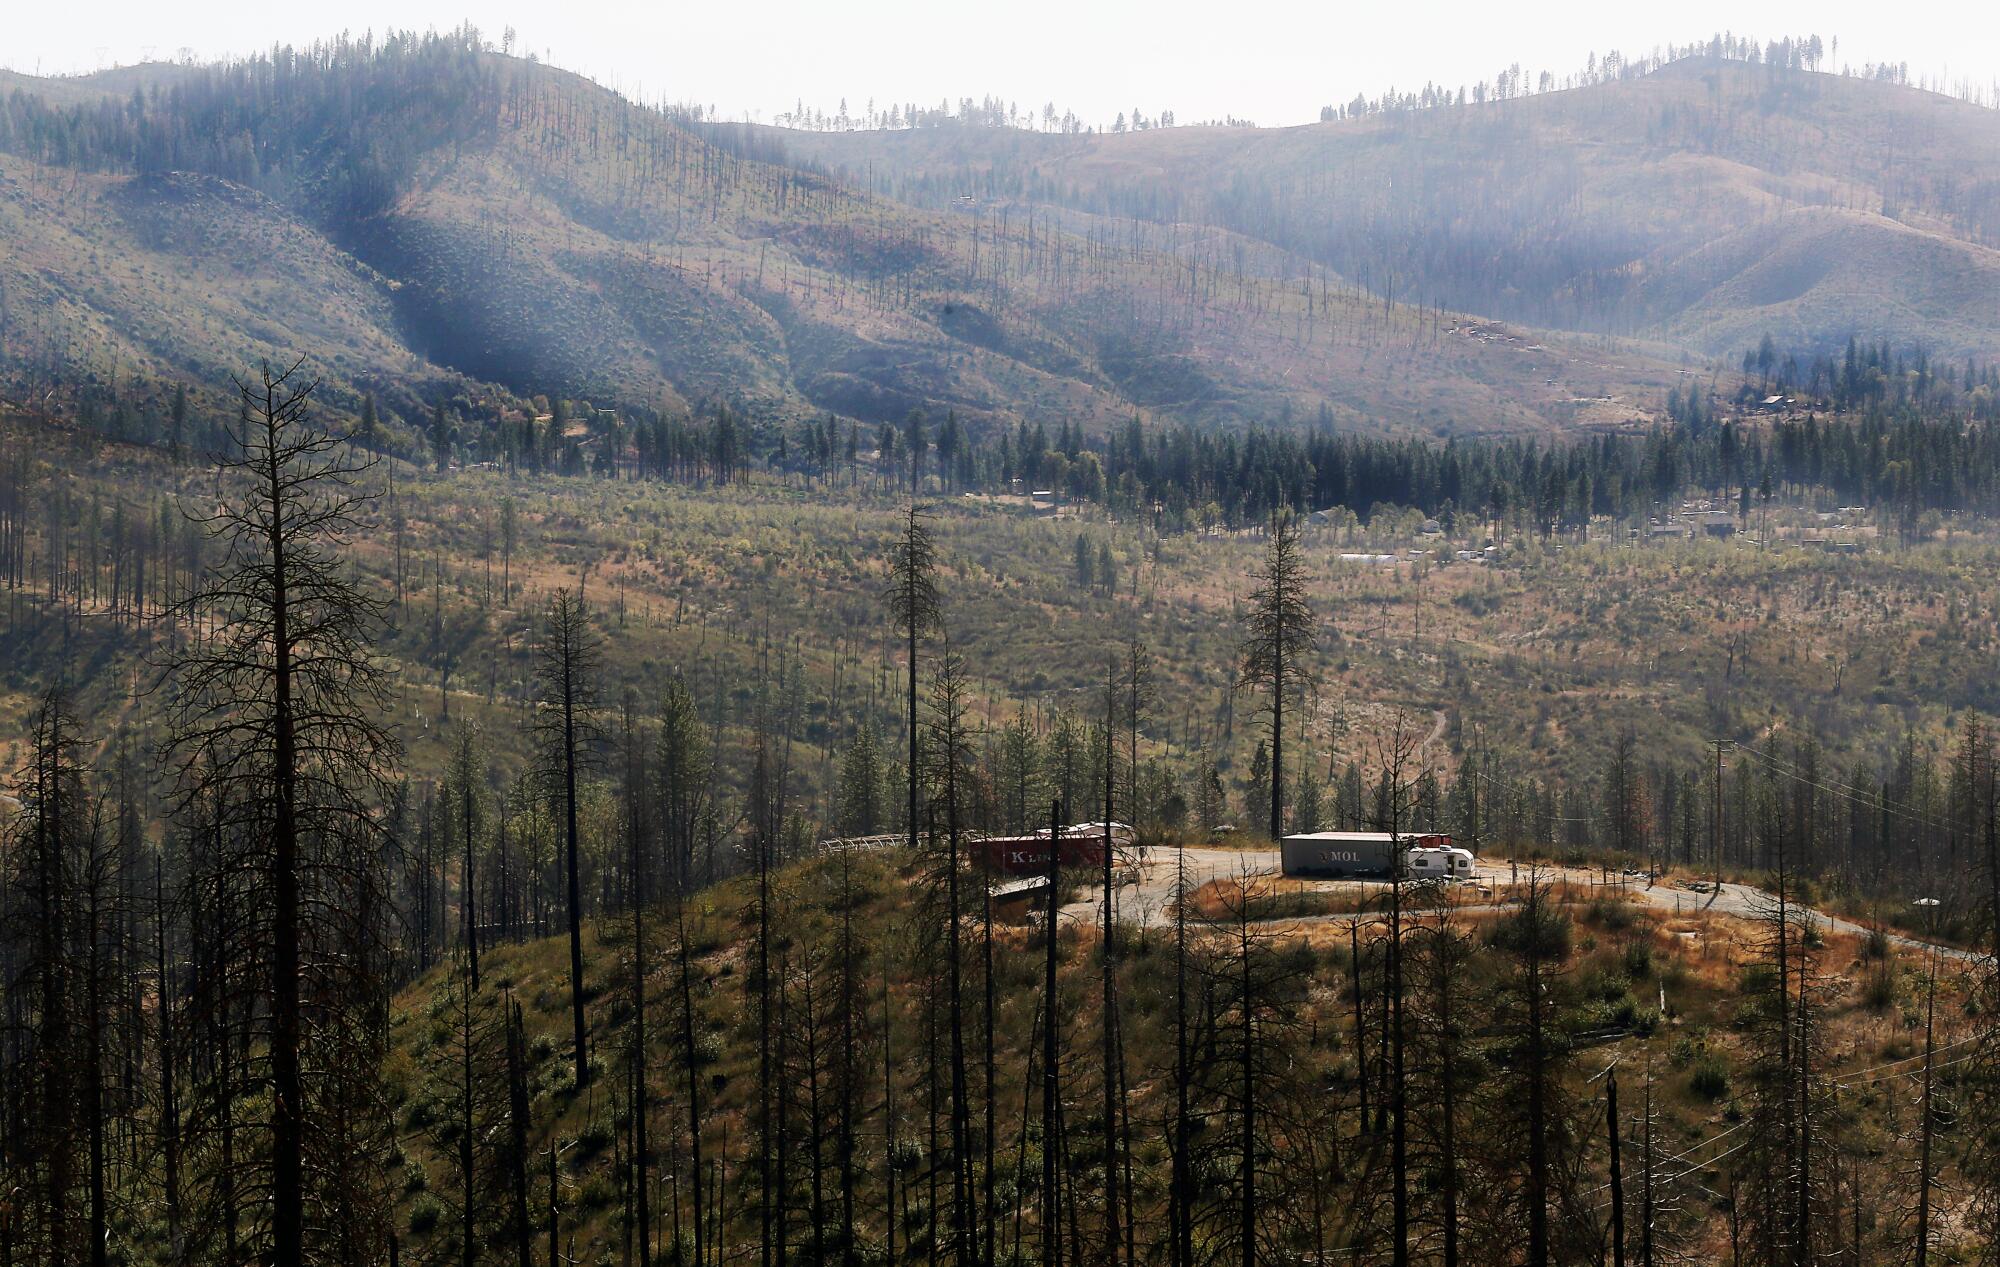 A few structures and a camper on top of a hill, surrounded by charred trees and some regrowth on largely bare hills